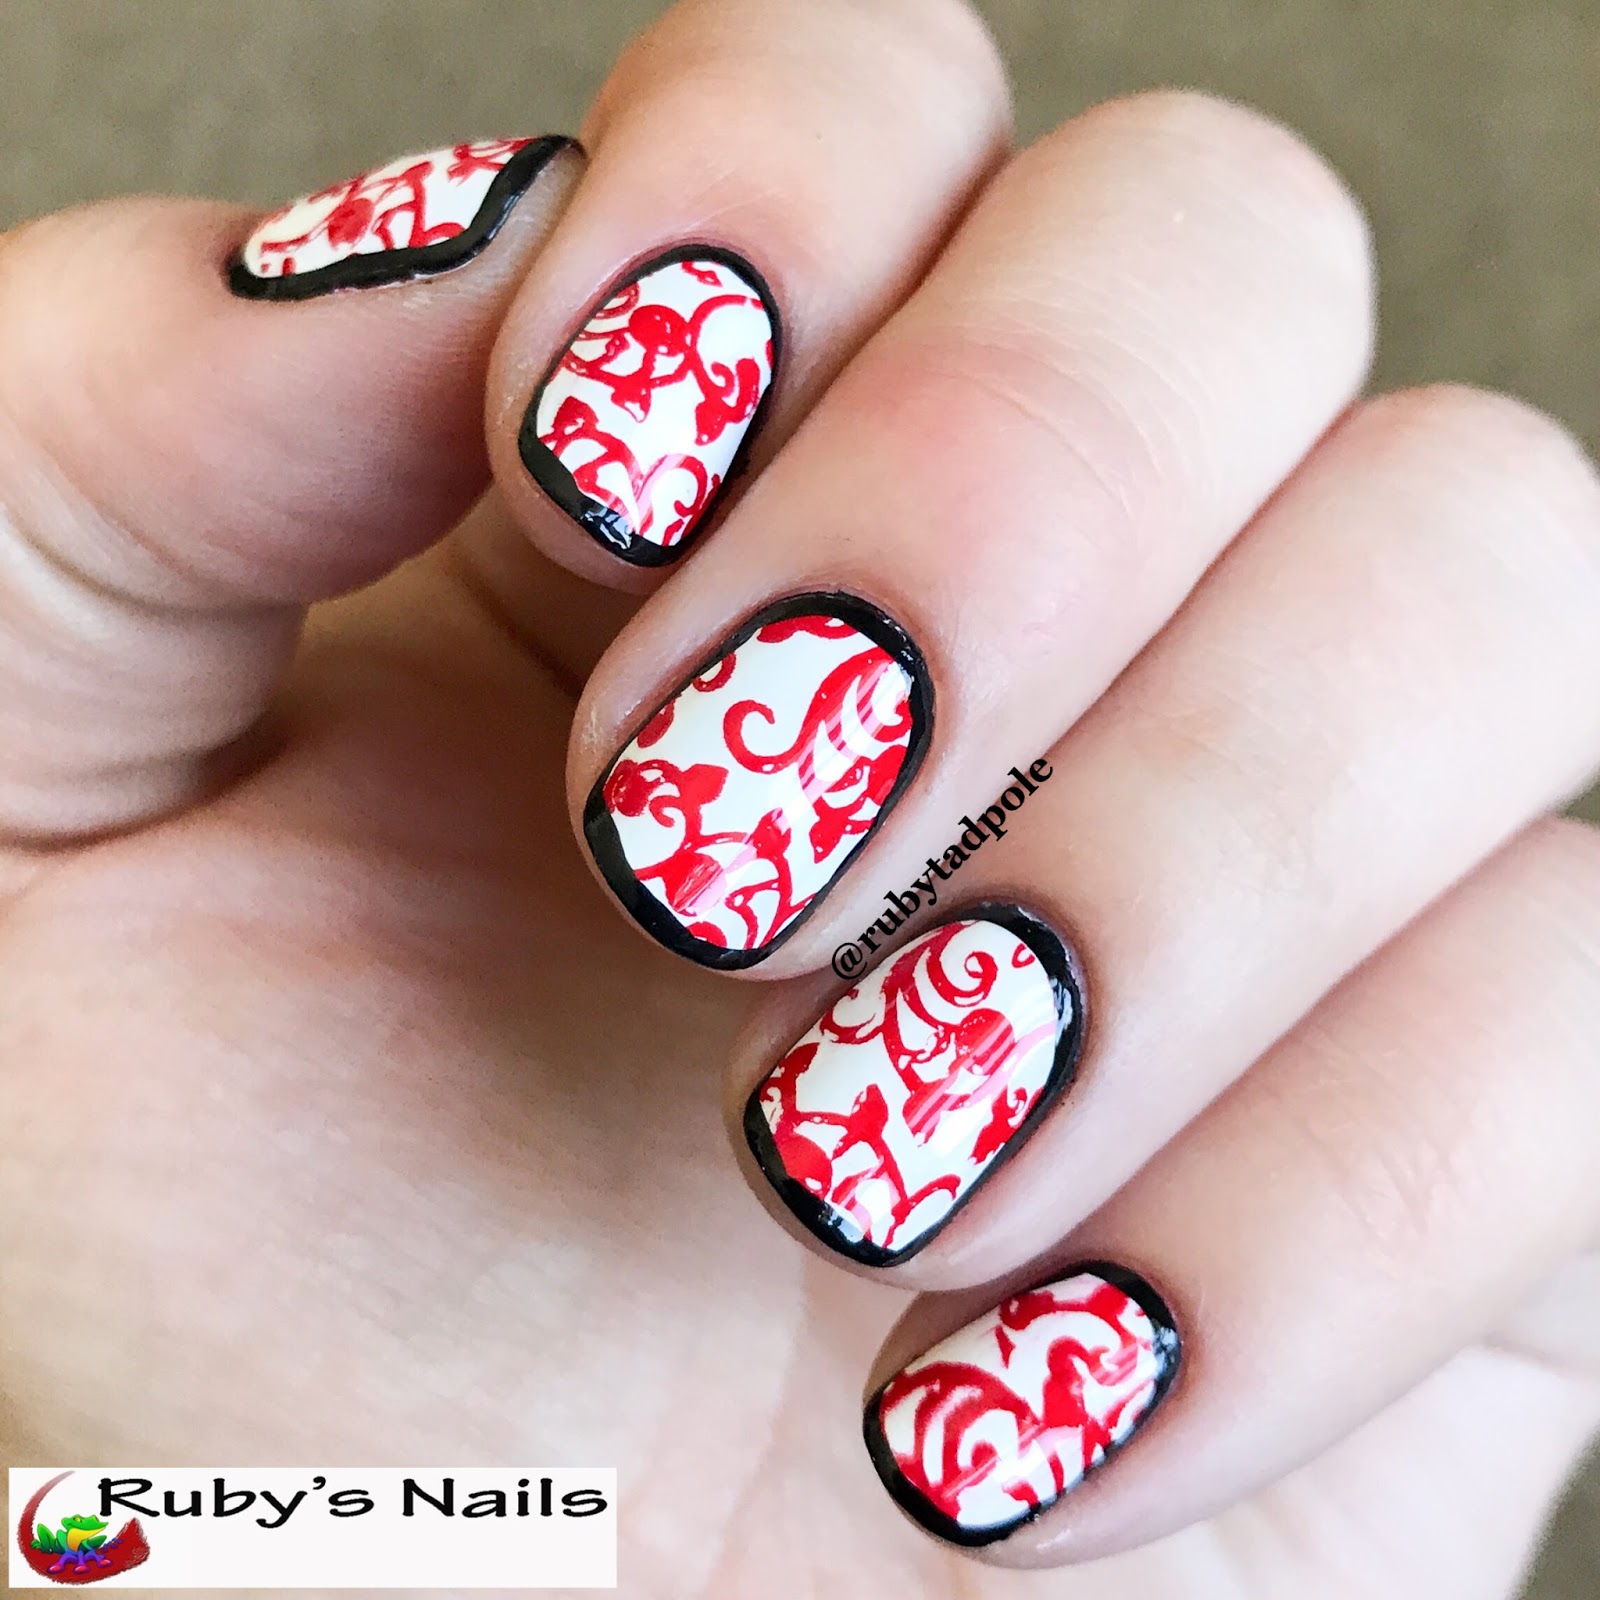 Ruby's Nails: Black, White, and Red Outline Mani with Tutorial!